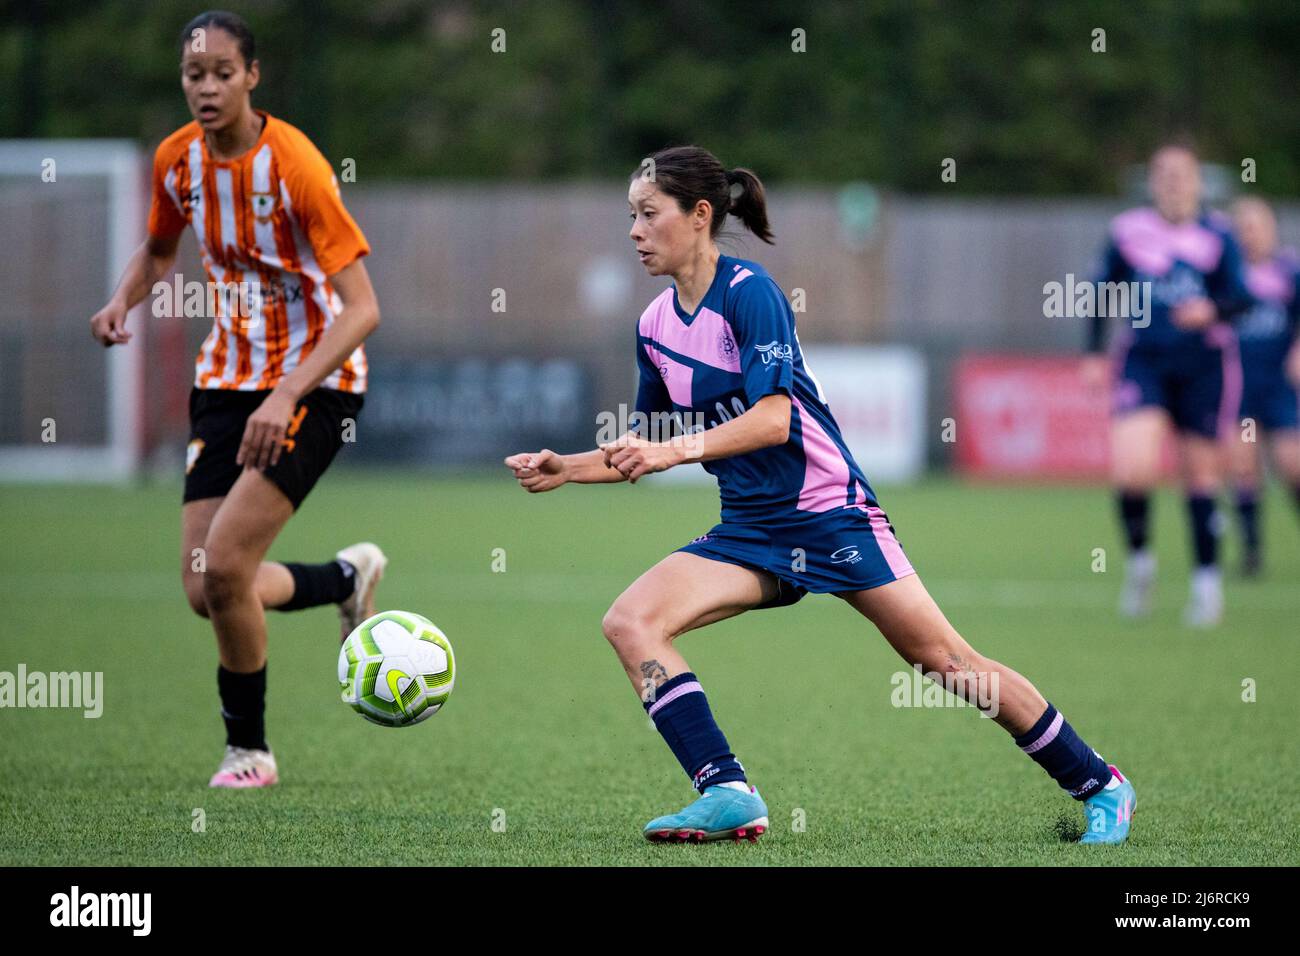 May 3, 2022, London, England, United Kingdom: London, England, May 3rd 2022: Lucy Monkman (14 Dulwich Hamlet) in action during the Capital Womens Senior Cup game between Ashford (Middlesex) and Dulwich Hamlet at Meadowbank in London, England.  Liam Asman/SPP (Credit Image: © Liam Asman/Sport Press Photo via ZUMA Press) Stock Photo